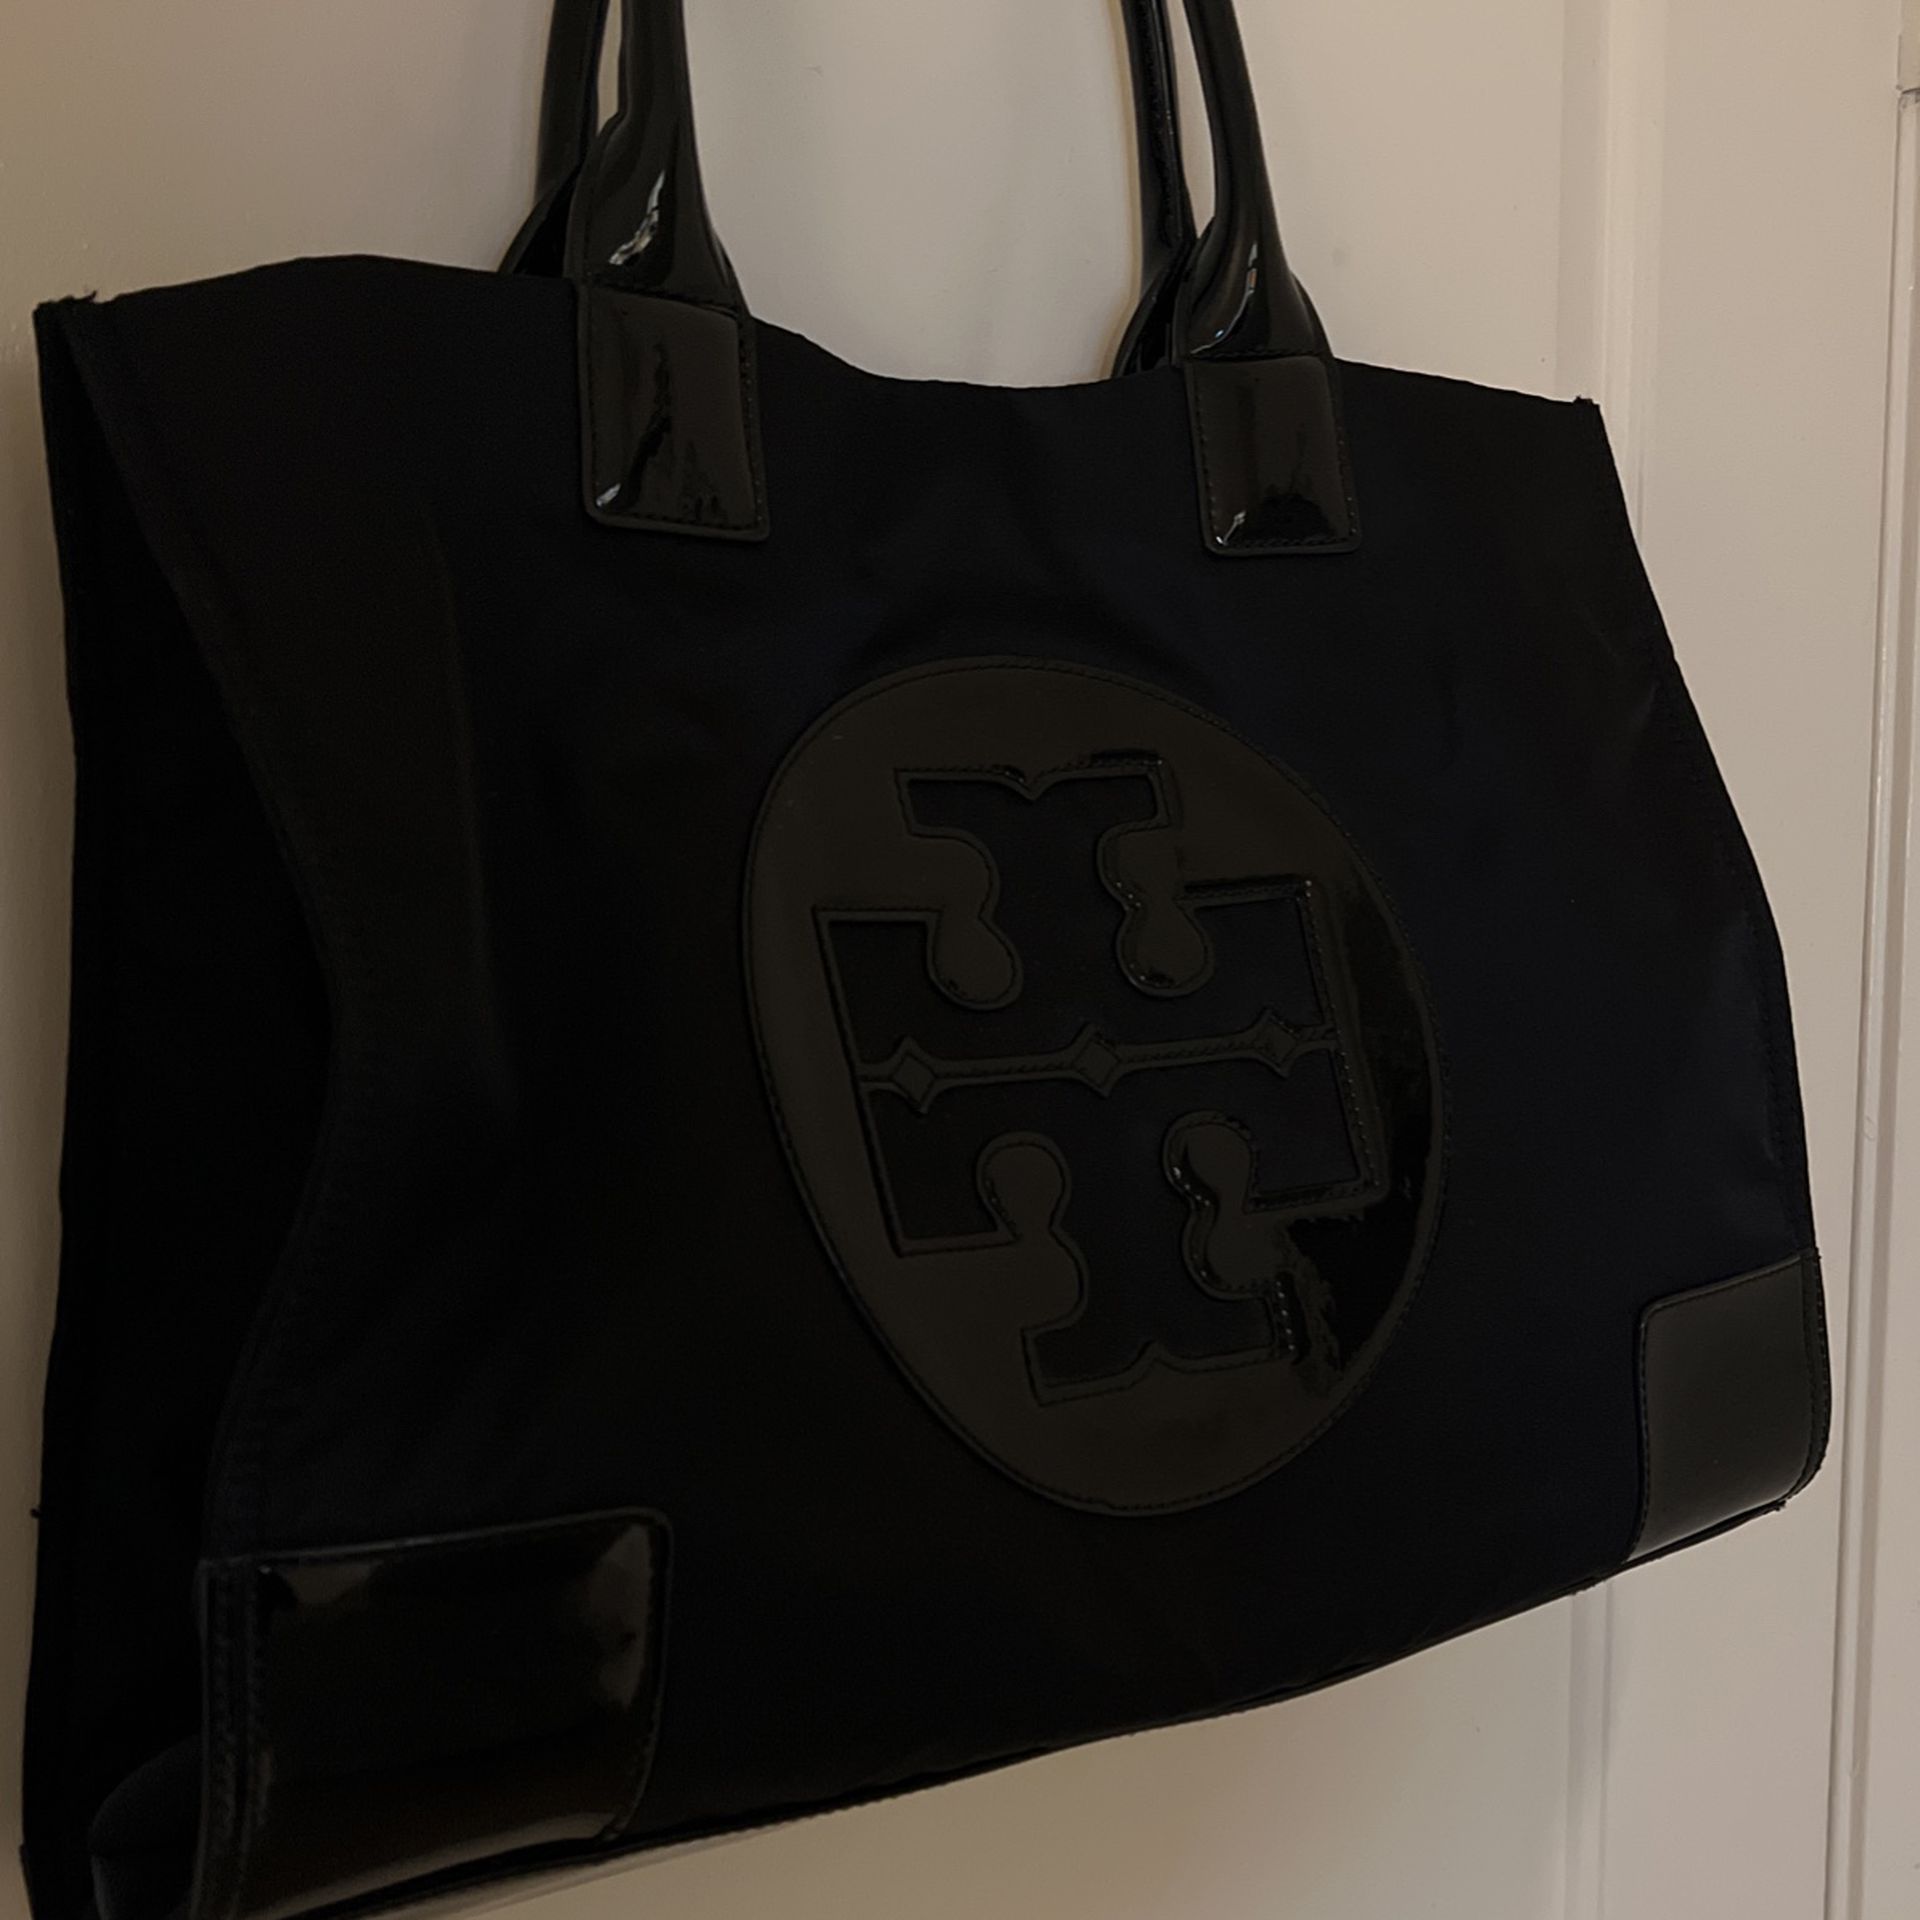 NWT Tory Burch Blake Canvas Small Tote NATURAL/CLASSIC CUOIO/BROWN 145356  for Sale in Las Vegas, NV - OfferUp